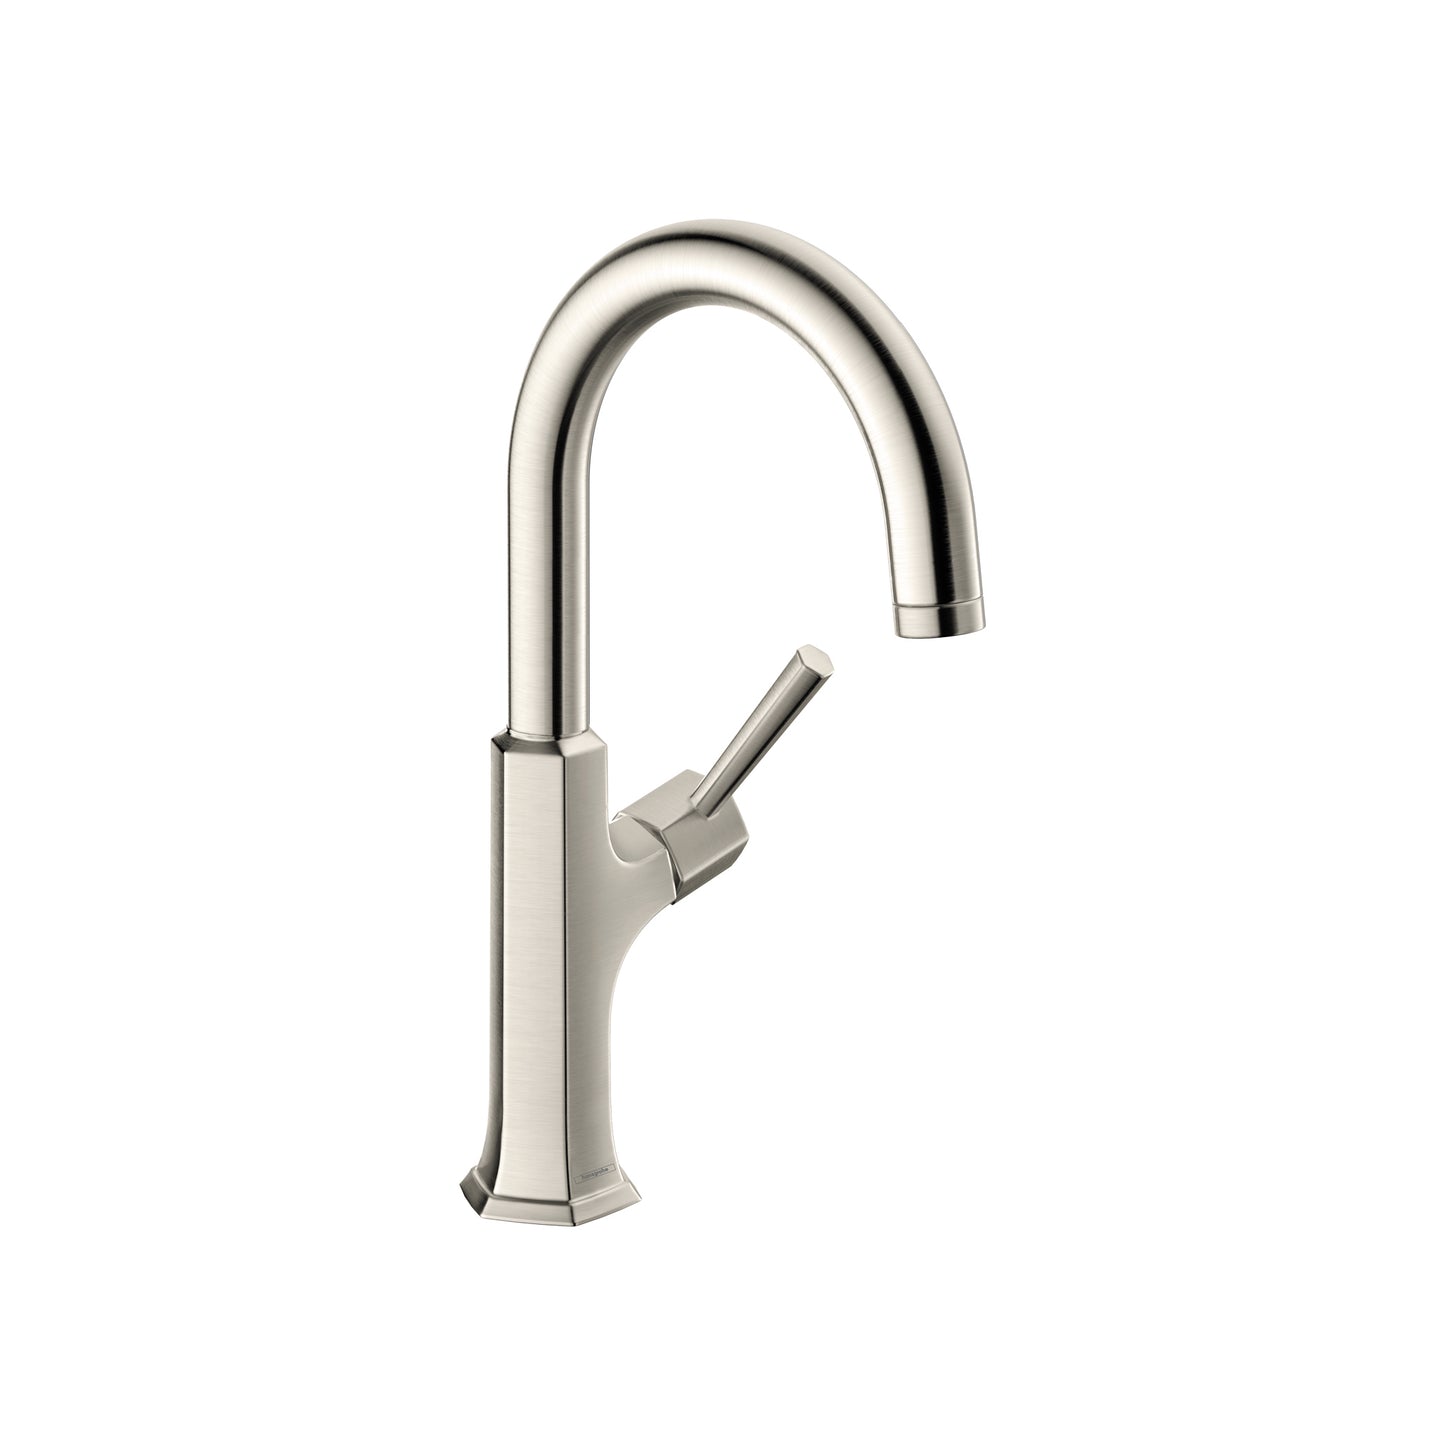 HANSGROHE 04854800 Stainless Steel Optic Locarno Transitional Kitchen Faucet 1.5 GPM